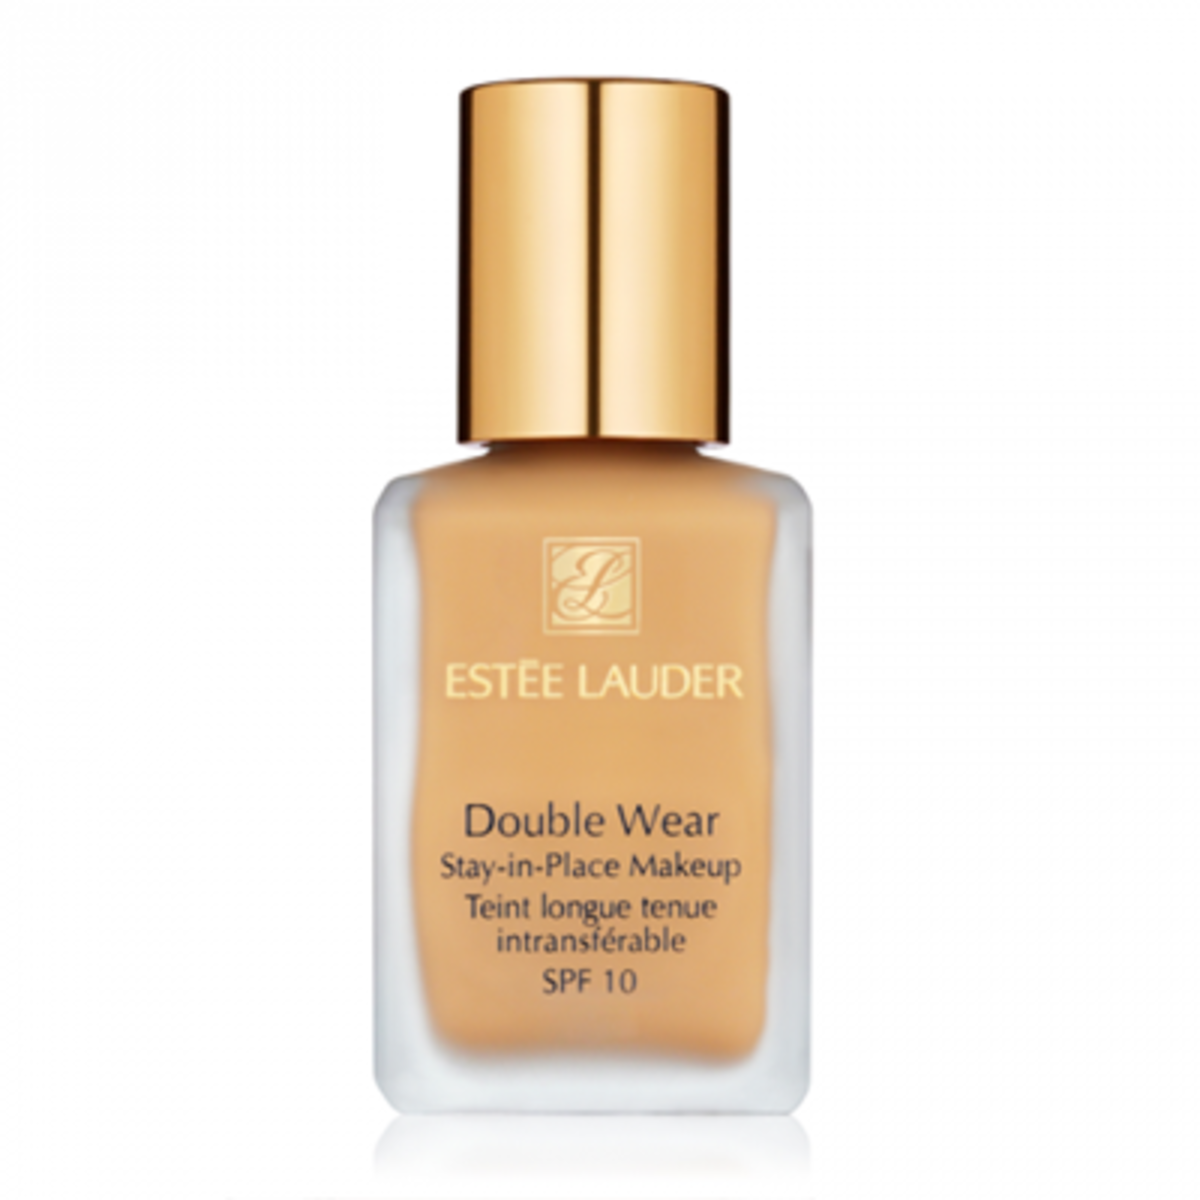 Estee Lauder, Double Wear, Stay-in-Place Makeup SPF 10